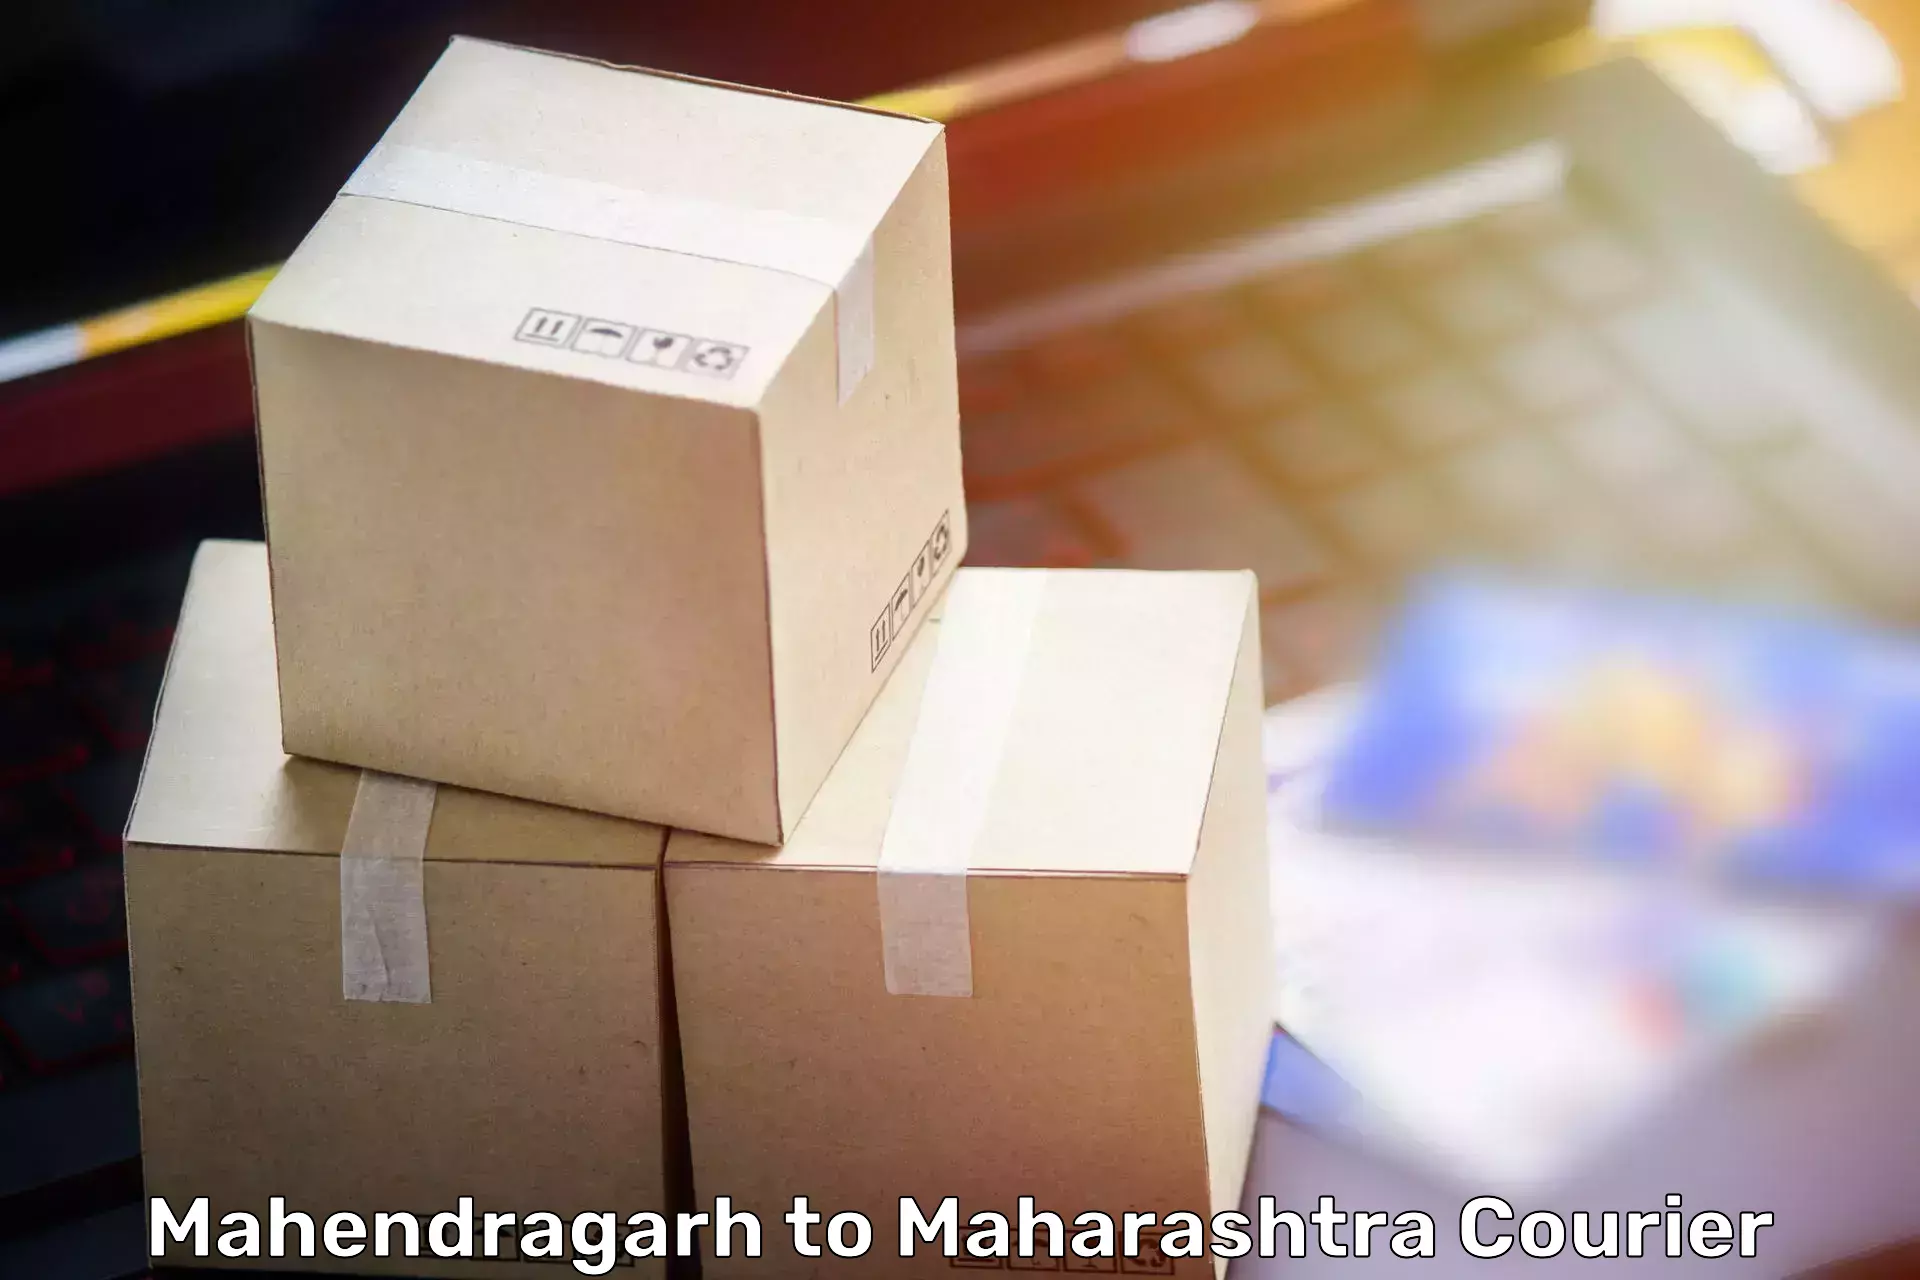 Trusted relocation experts Mahendragarh to Umred